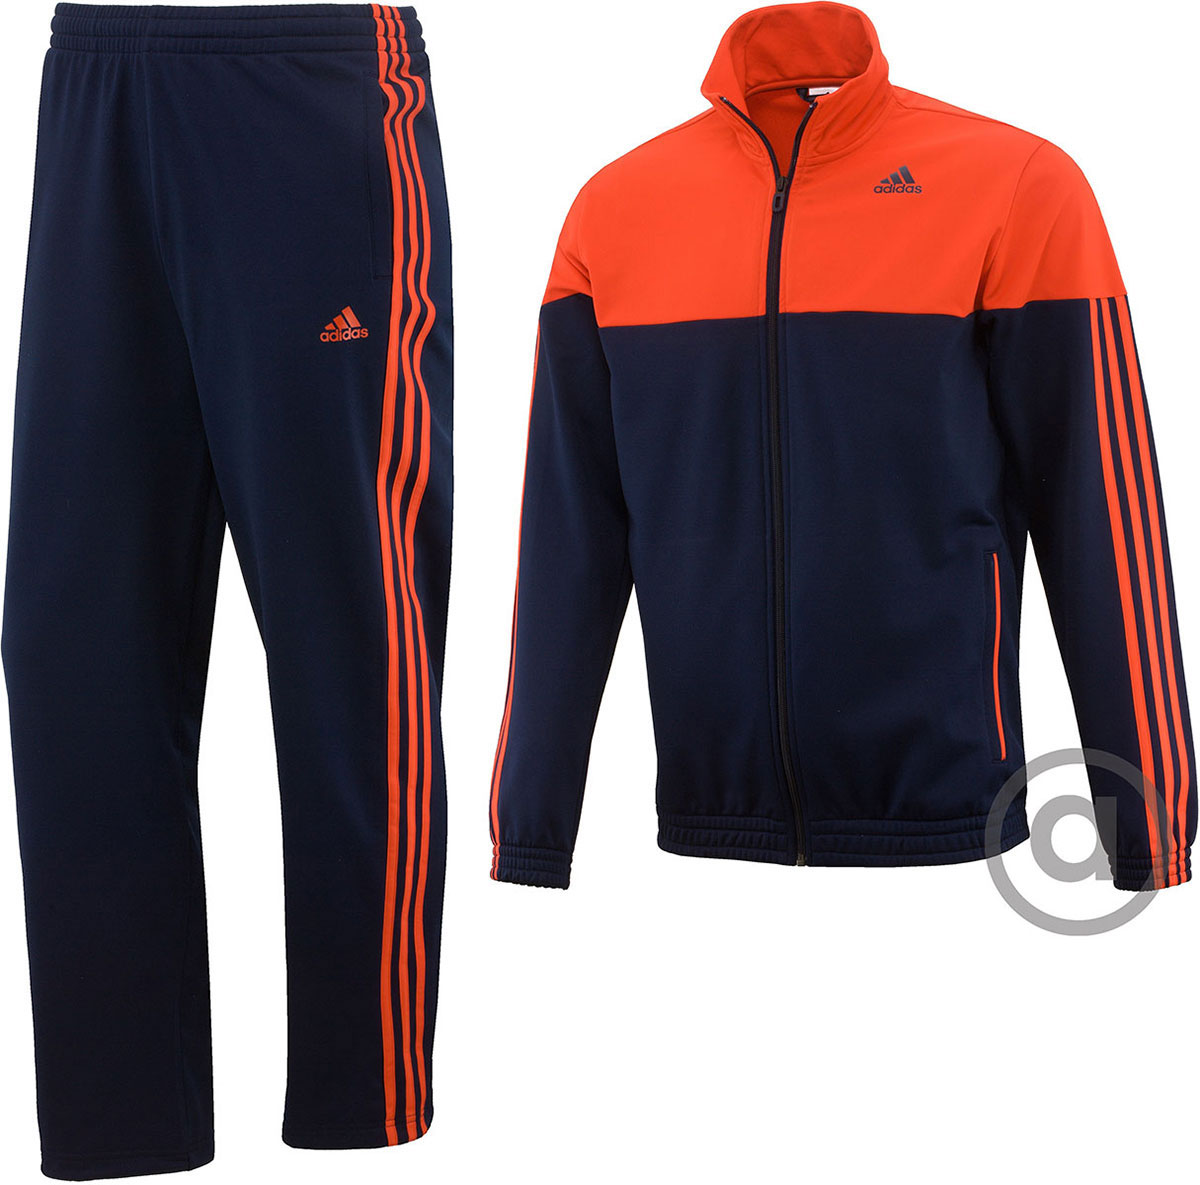 Adidas Climalite track Suit